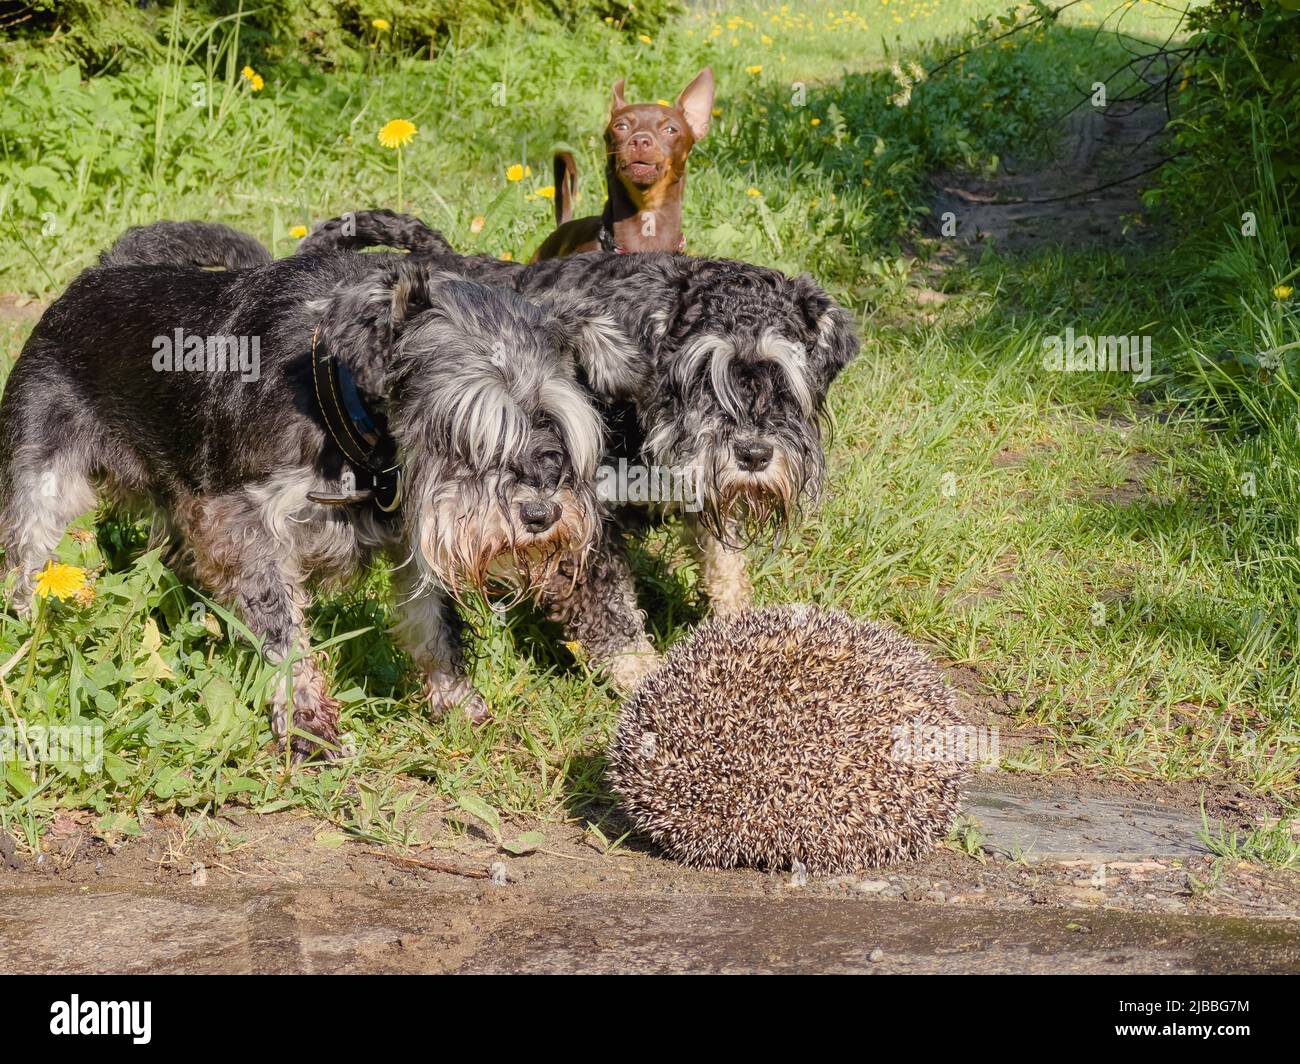 Three dogs barking on a hedgehog. Wild animals often carry infectious diseases such as Rabies. Stock Photo